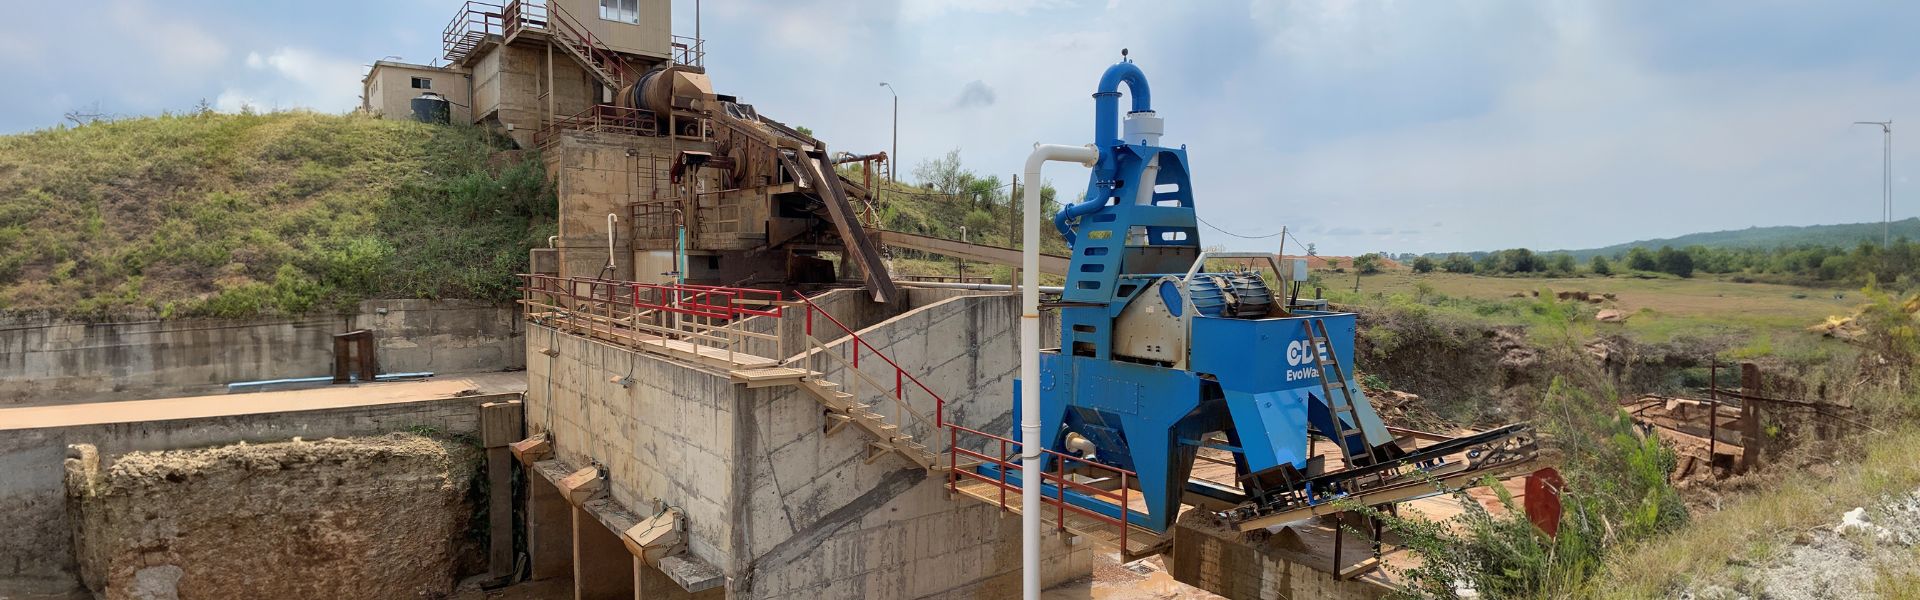 Bisio Hnos S.A. modernize operations with state-of-the-art sand washing plant.